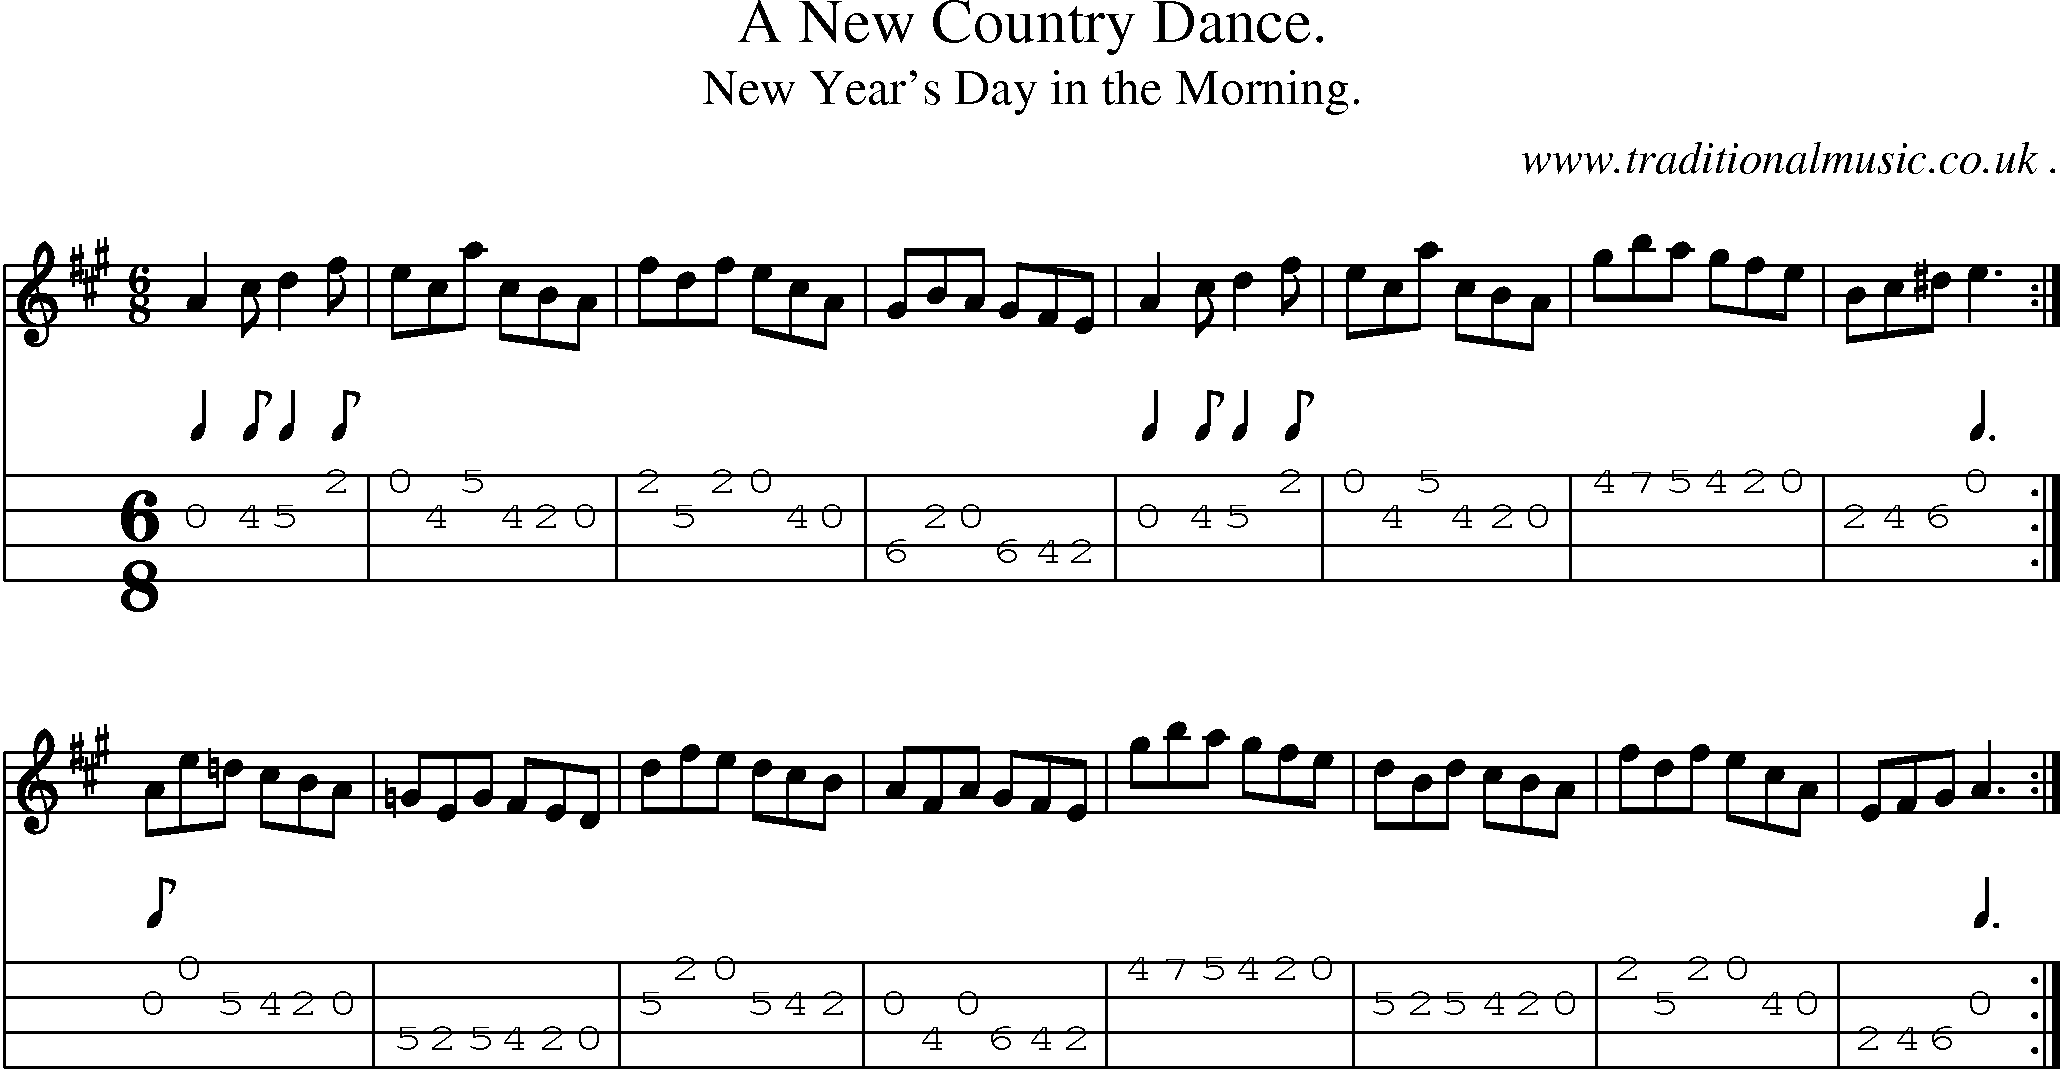 Sheet-music  score, Chords and Mandolin Tabs for A New Country Dance